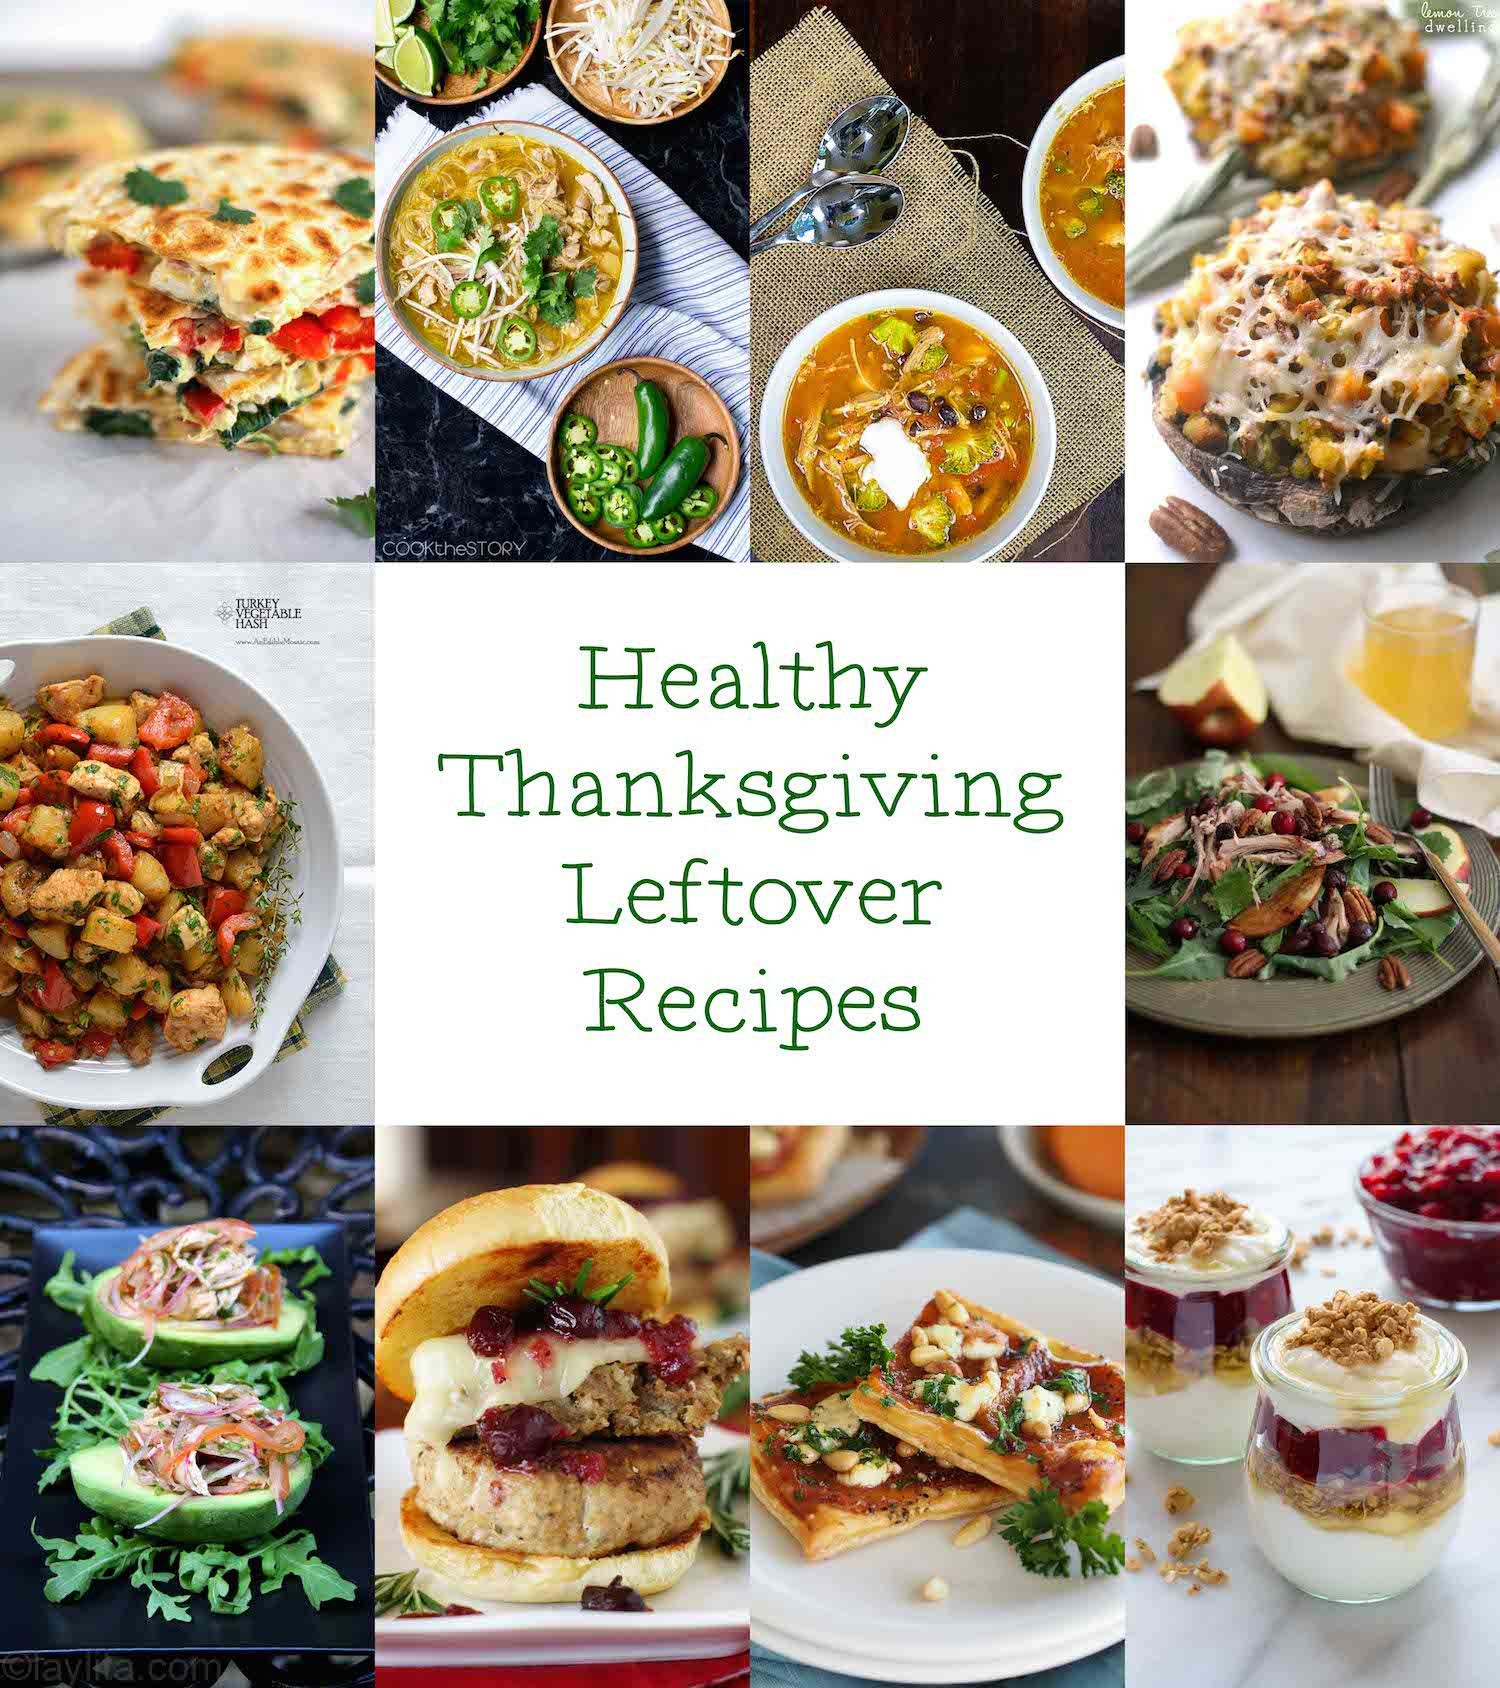 Healthy Thanksgiving Recipes
 20 Healthy Thanksgiving Leftover Recipes A Healthy Life